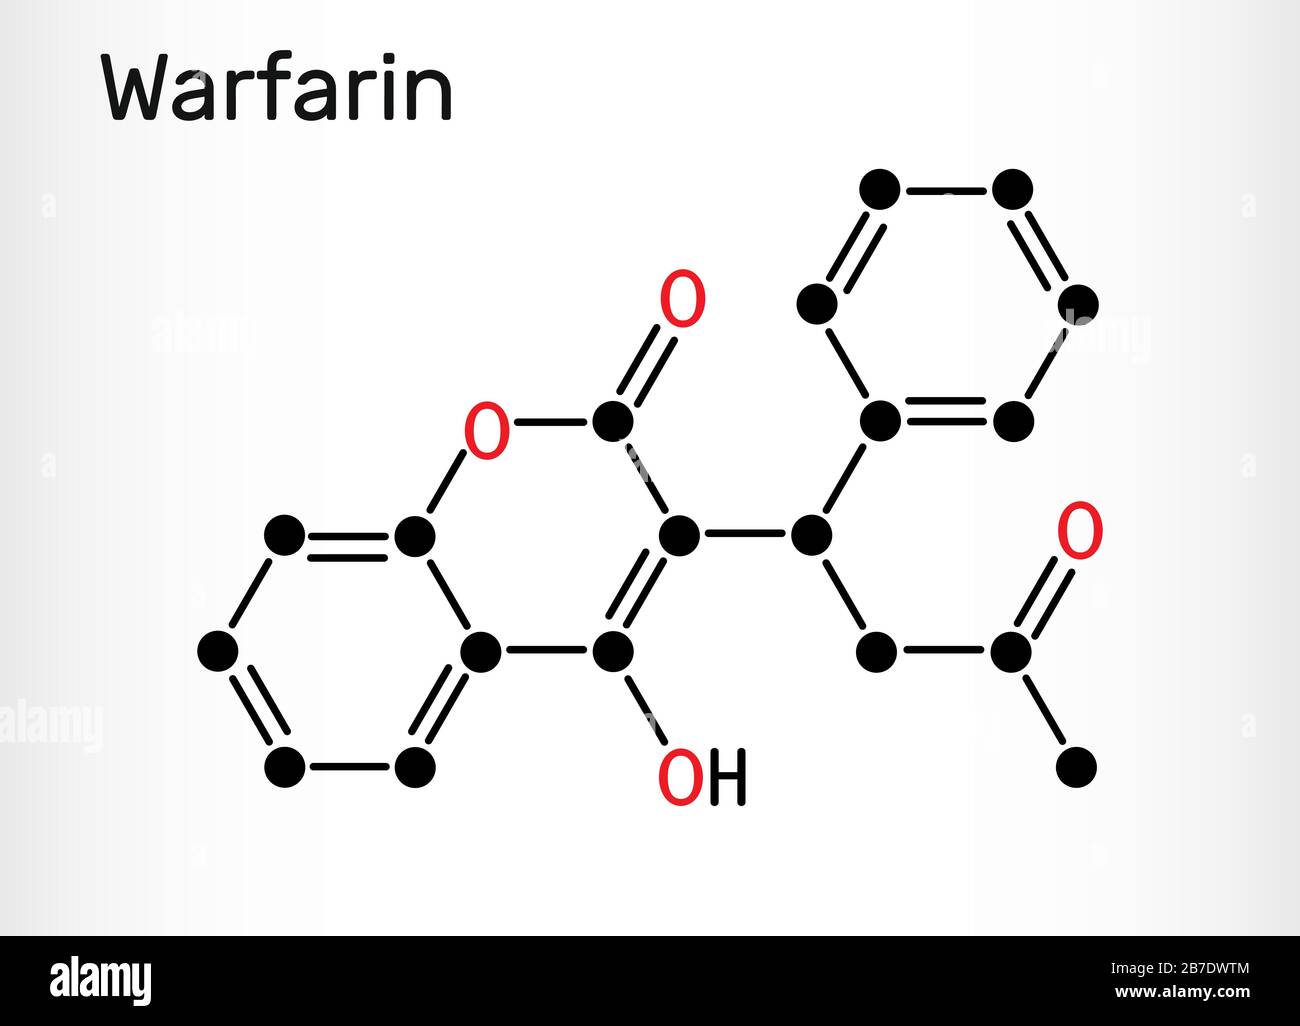 Warfarin, C19H16O4 molecule. Warfarin is an anticoagulant drug normally used to prevent blood clot formation. Skeletal chemical formula. Vector illust Stock Vector